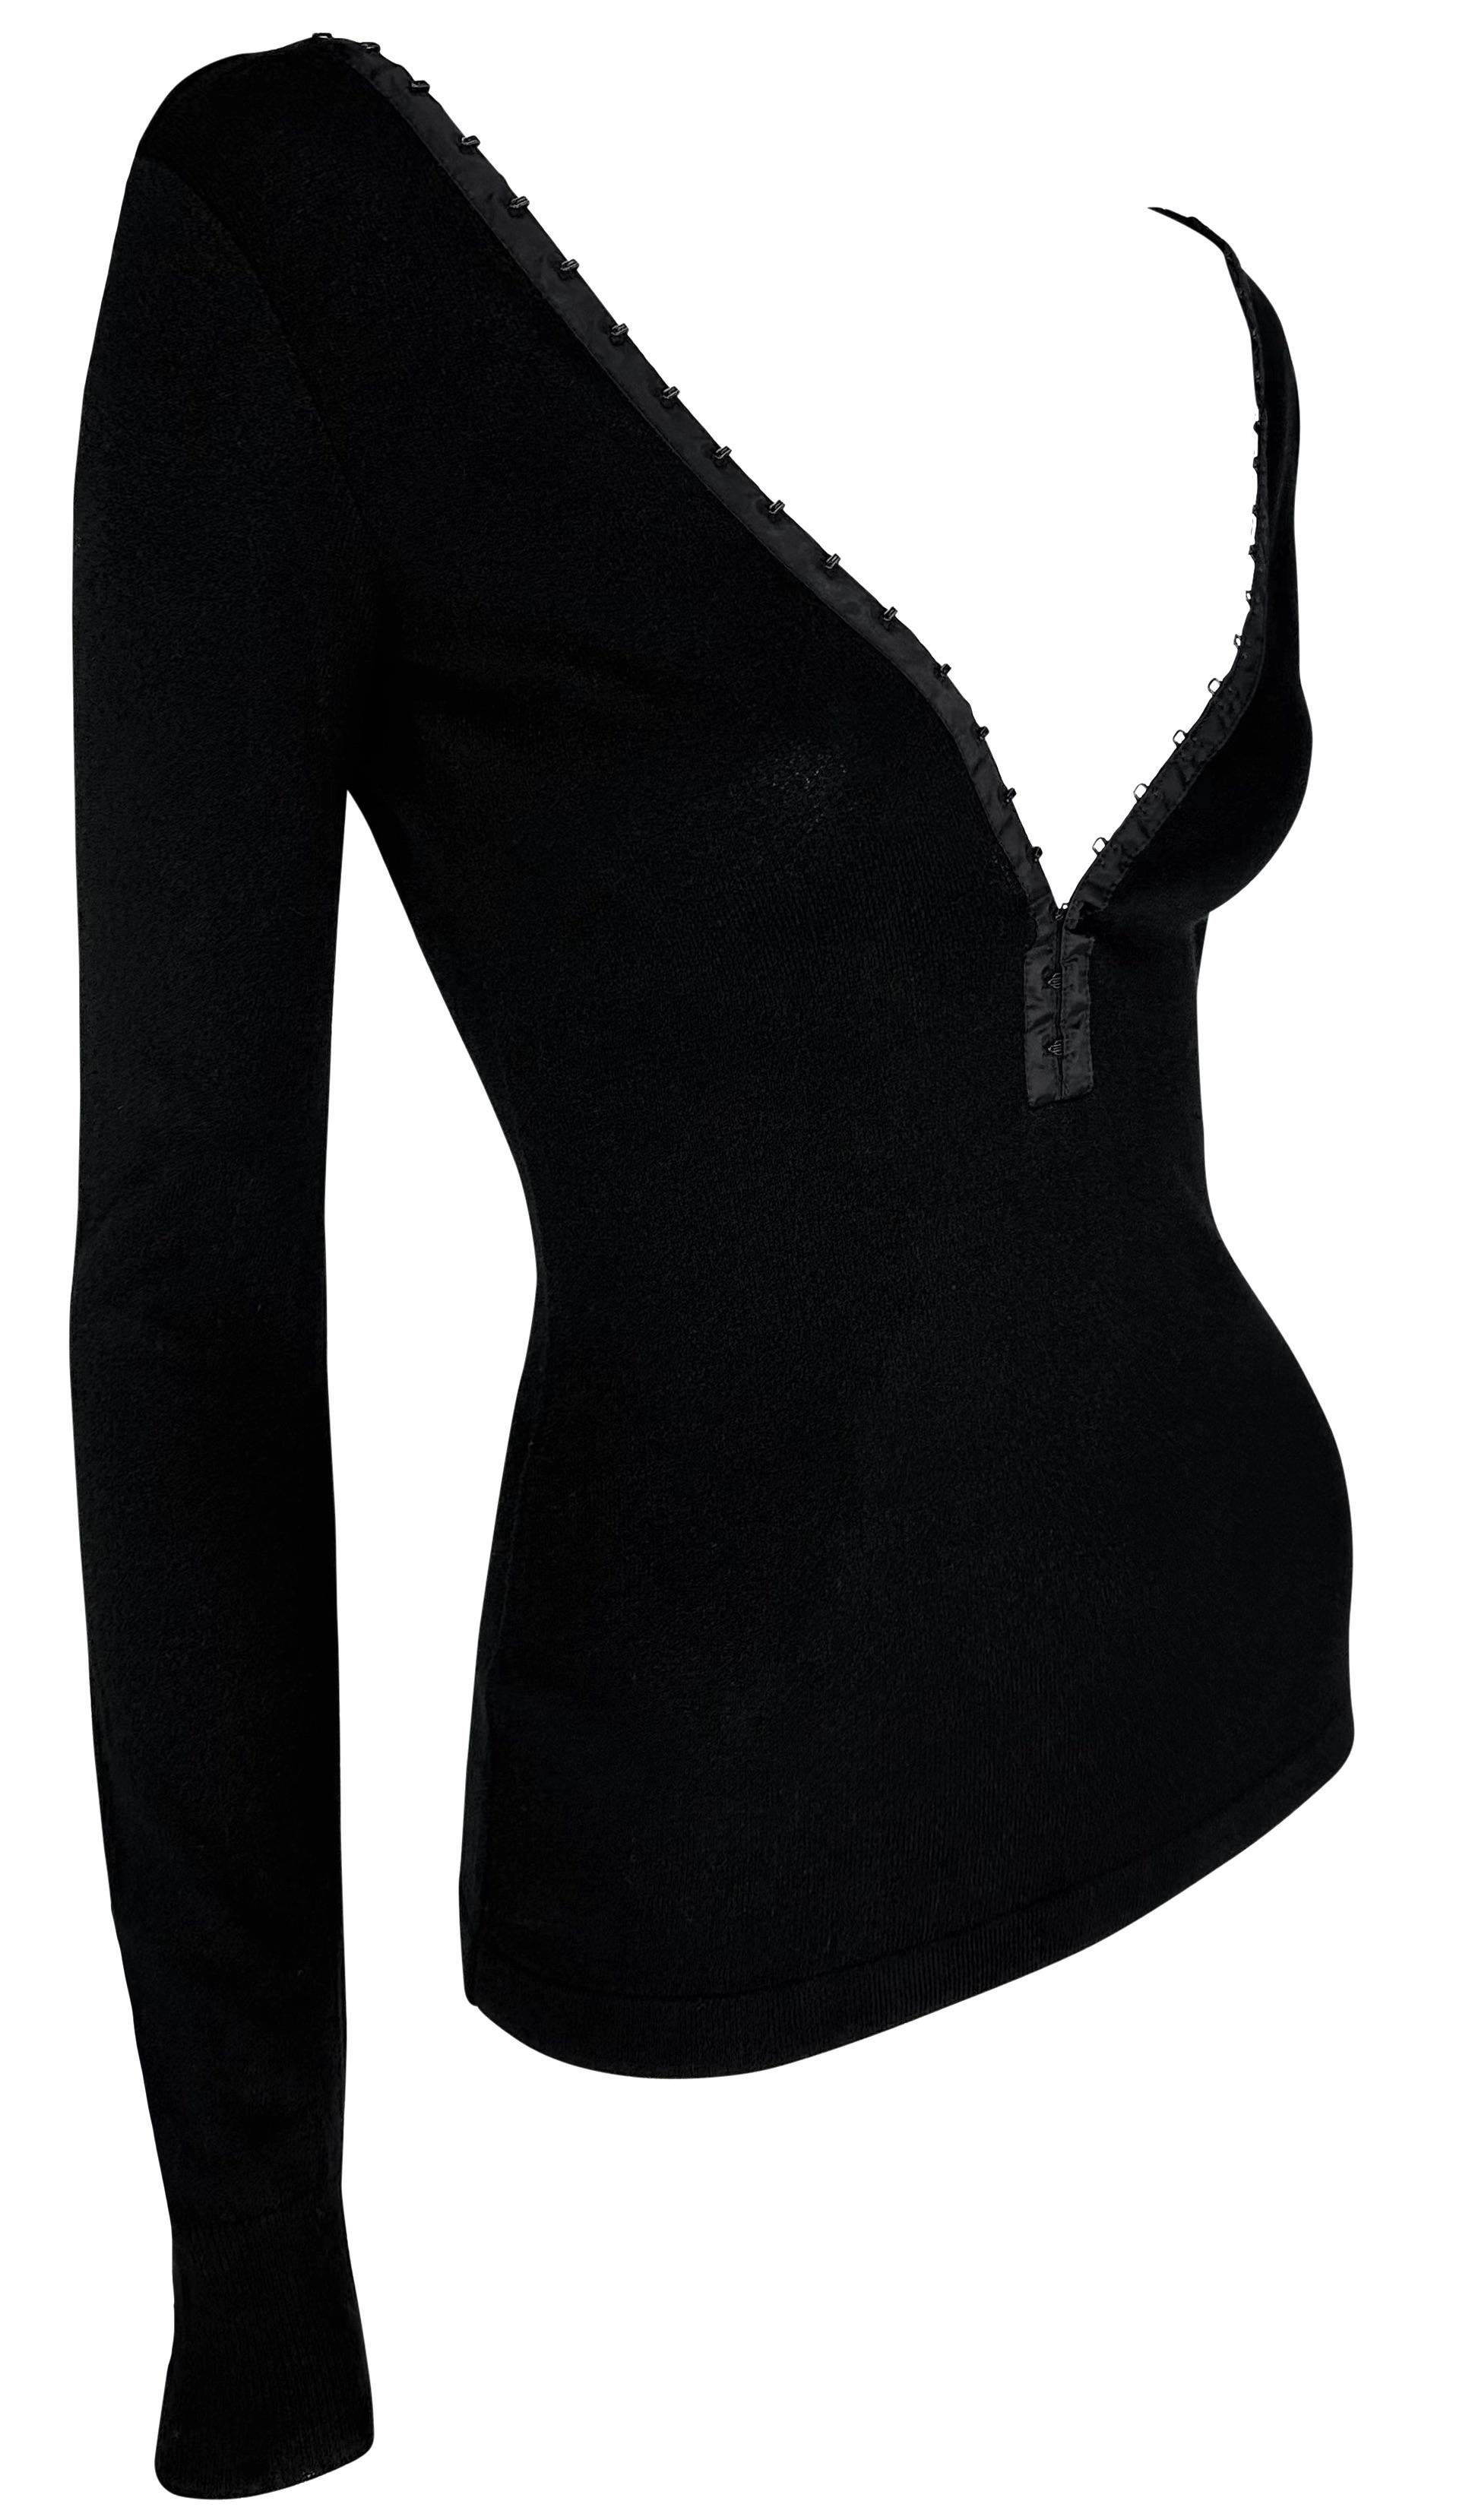 S/S 2003 Dolce & Gabbana Hook & Eye Plunging Black Bodycon Knit Long-Sleeve Top For Sale 5